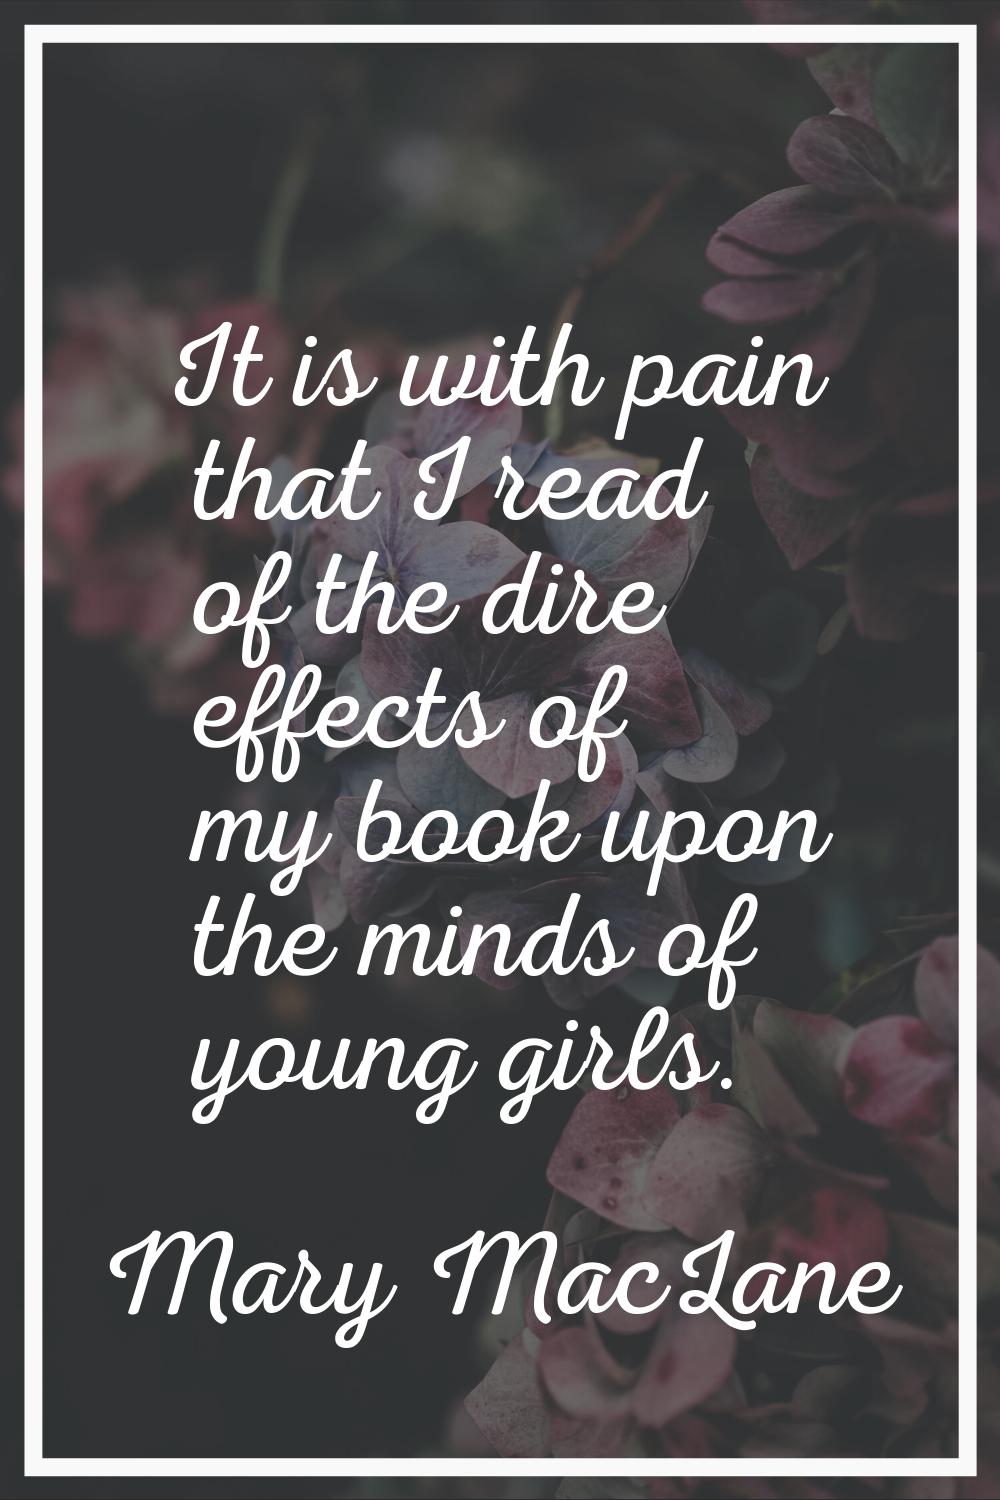 It is with pain that I read of the dire effects of my book upon the minds of young girls.